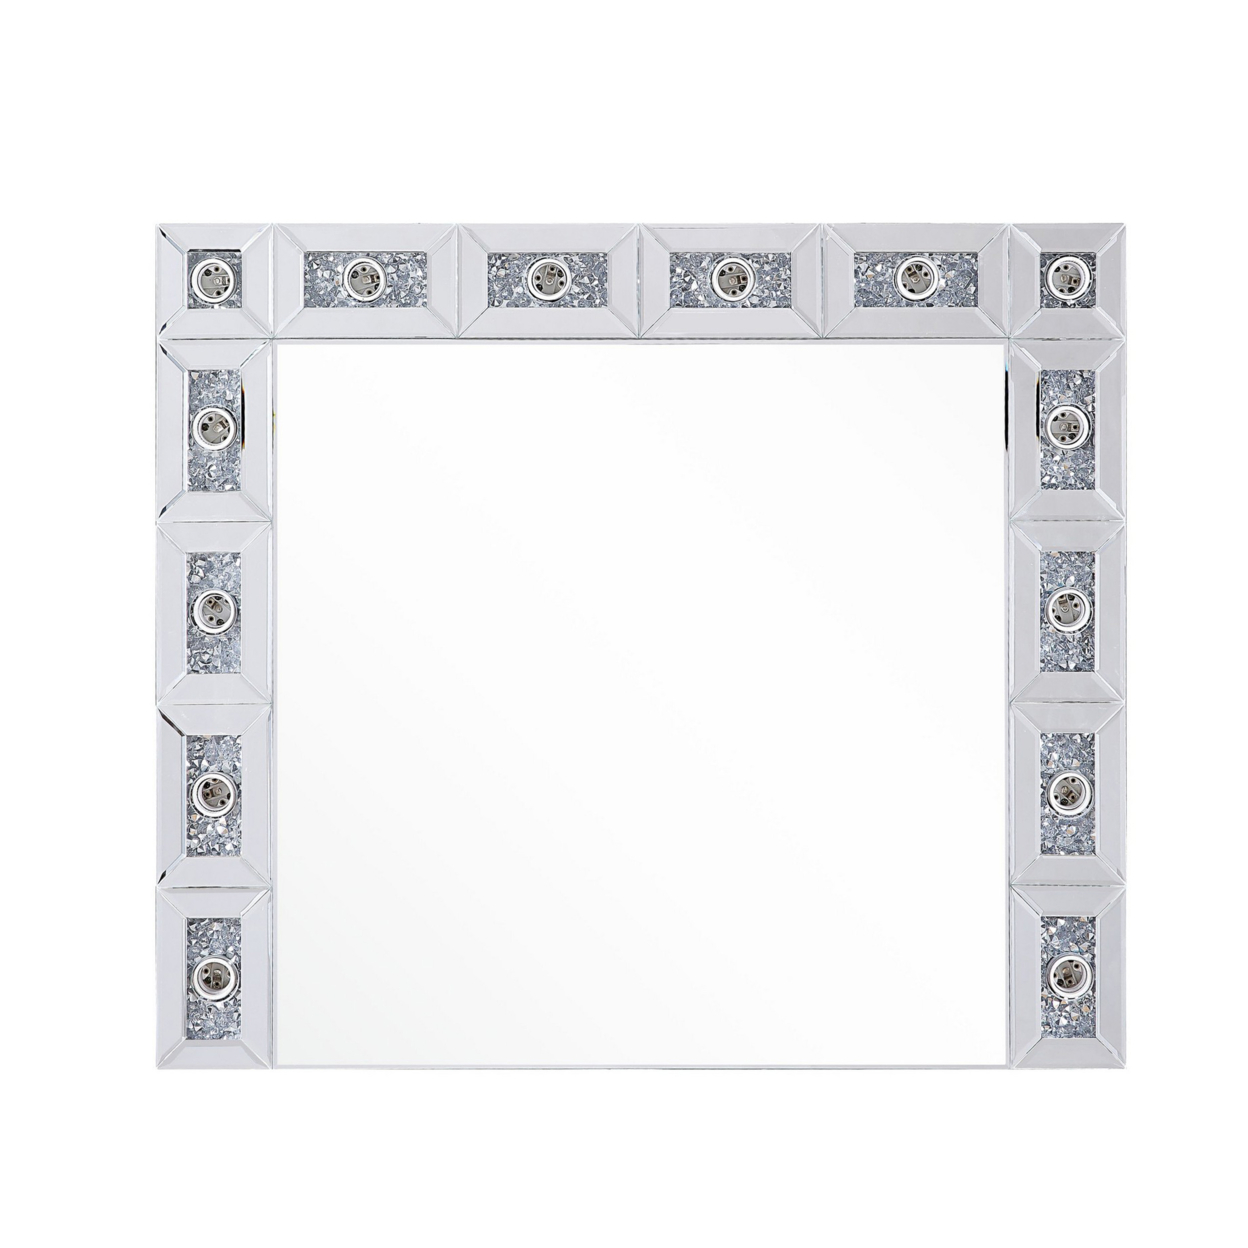 Mirror Panel Frame Wall Decor With Light Function And Faux Diamond, Silver- Saltoro Sherpi